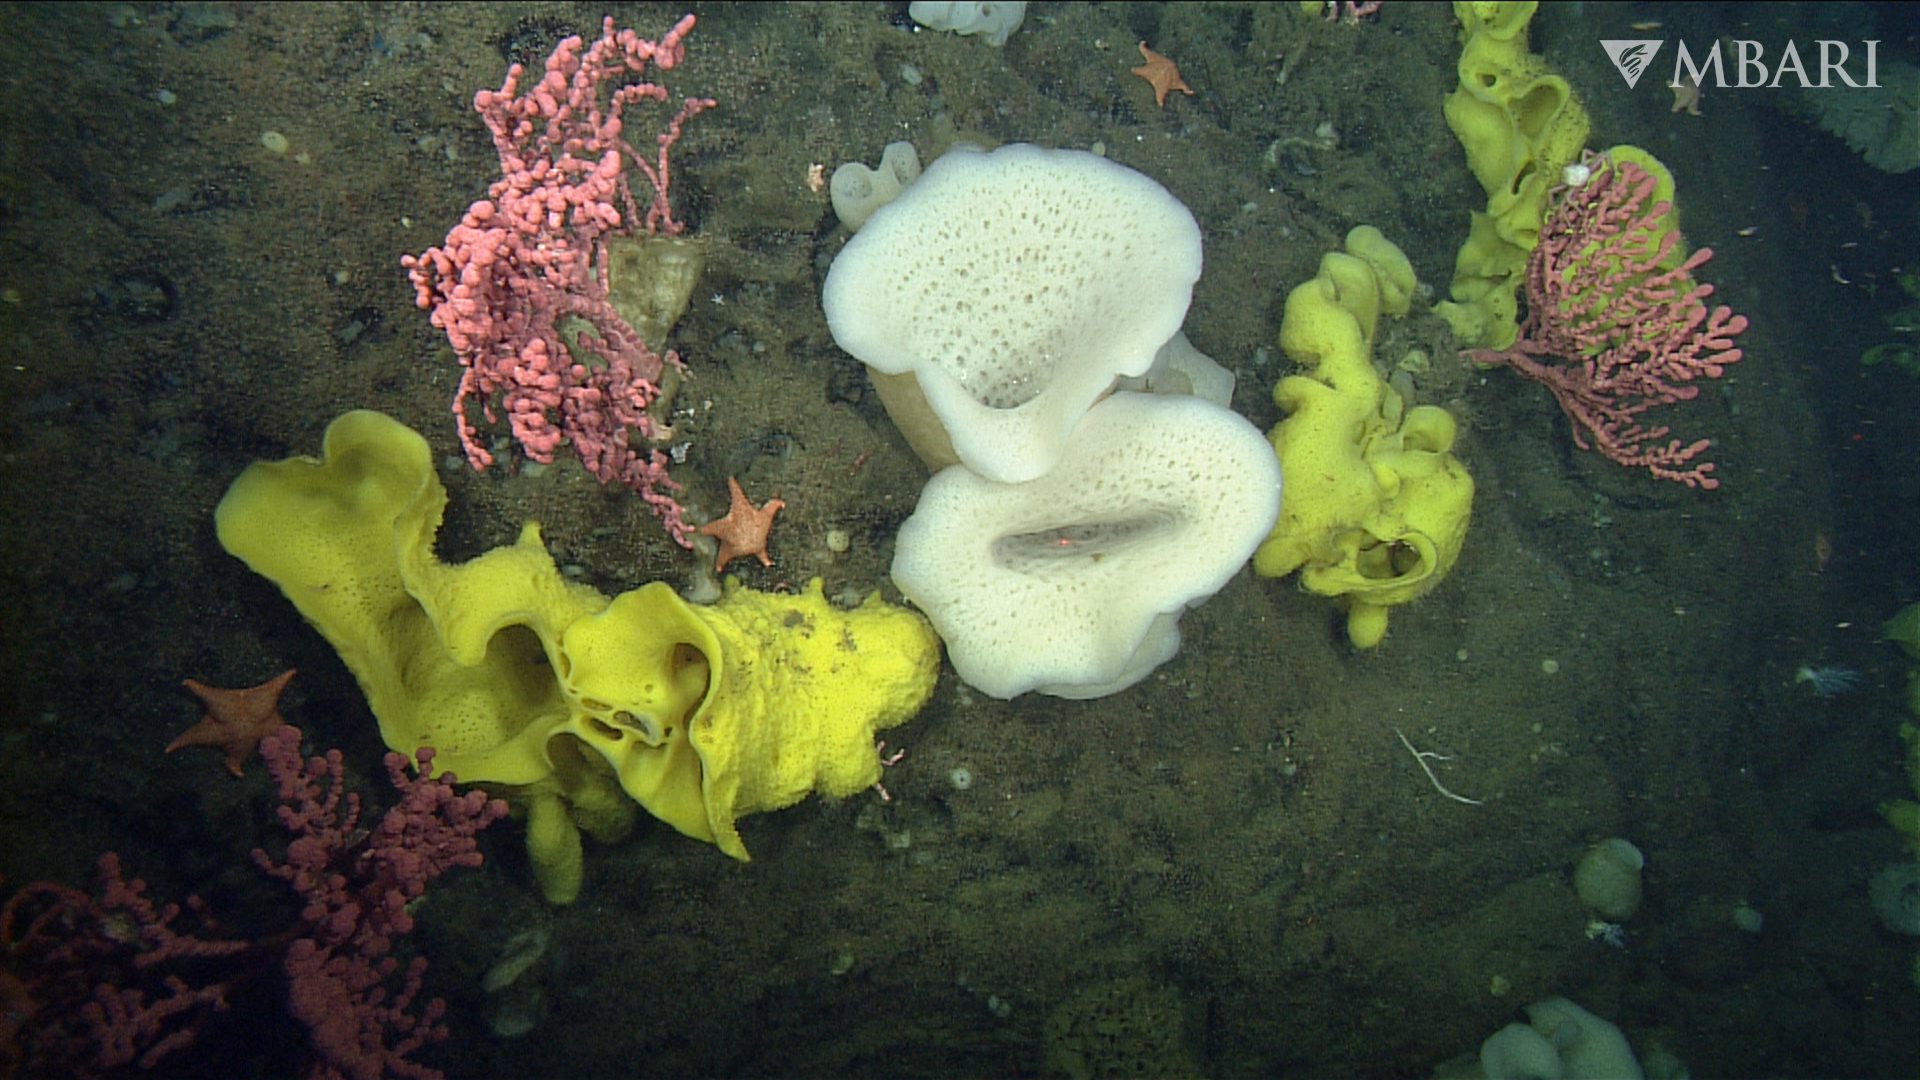 An assortment of sponges and coral that call Sur Ridge home. (Image: © 2019 MBARI)